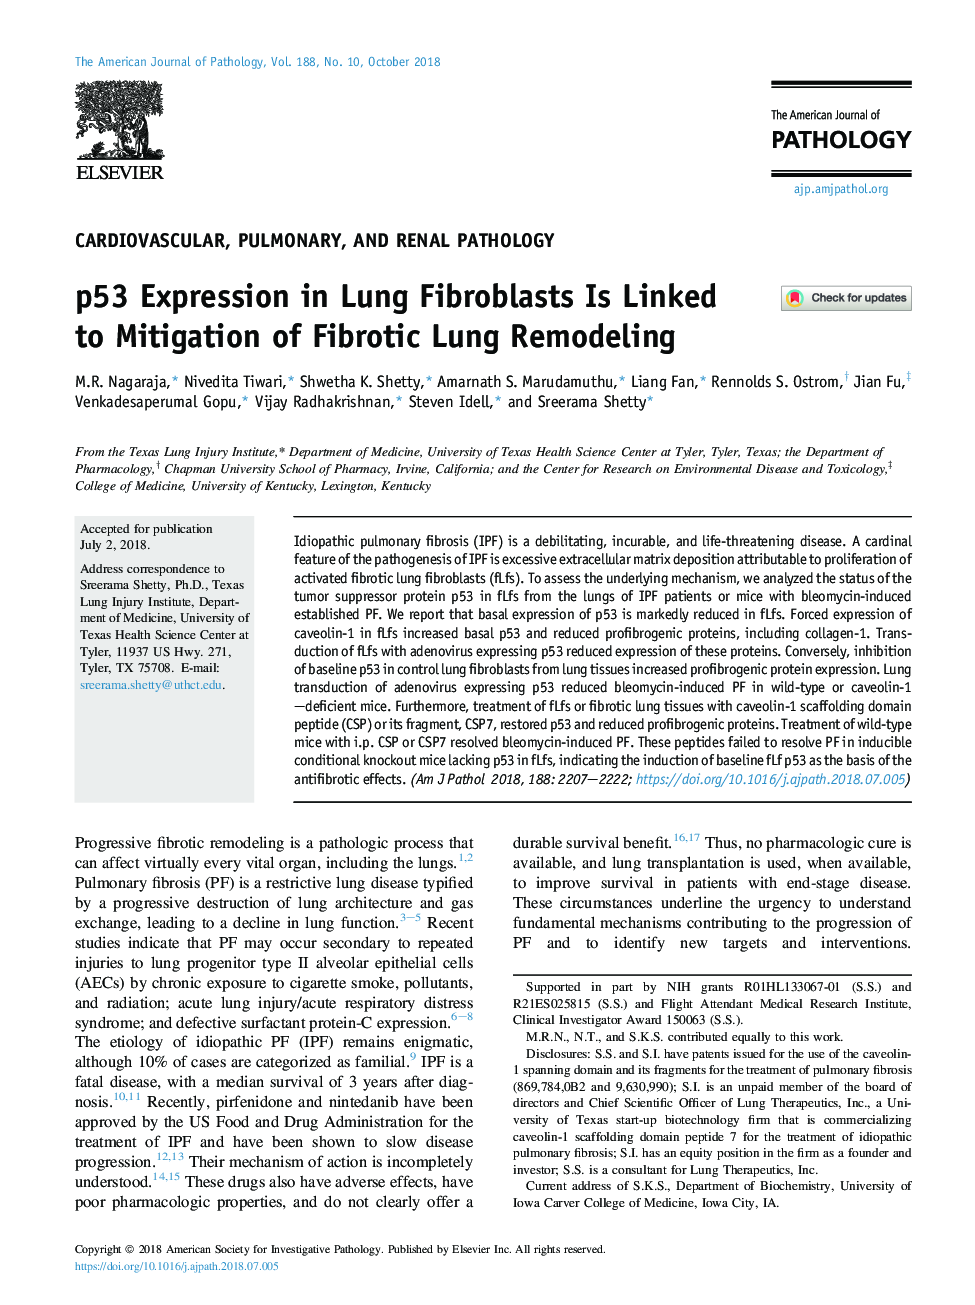 p53 Expression in Lung Fibroblasts Is Linked to Mitigation of Fibrotic Lung Remodeling